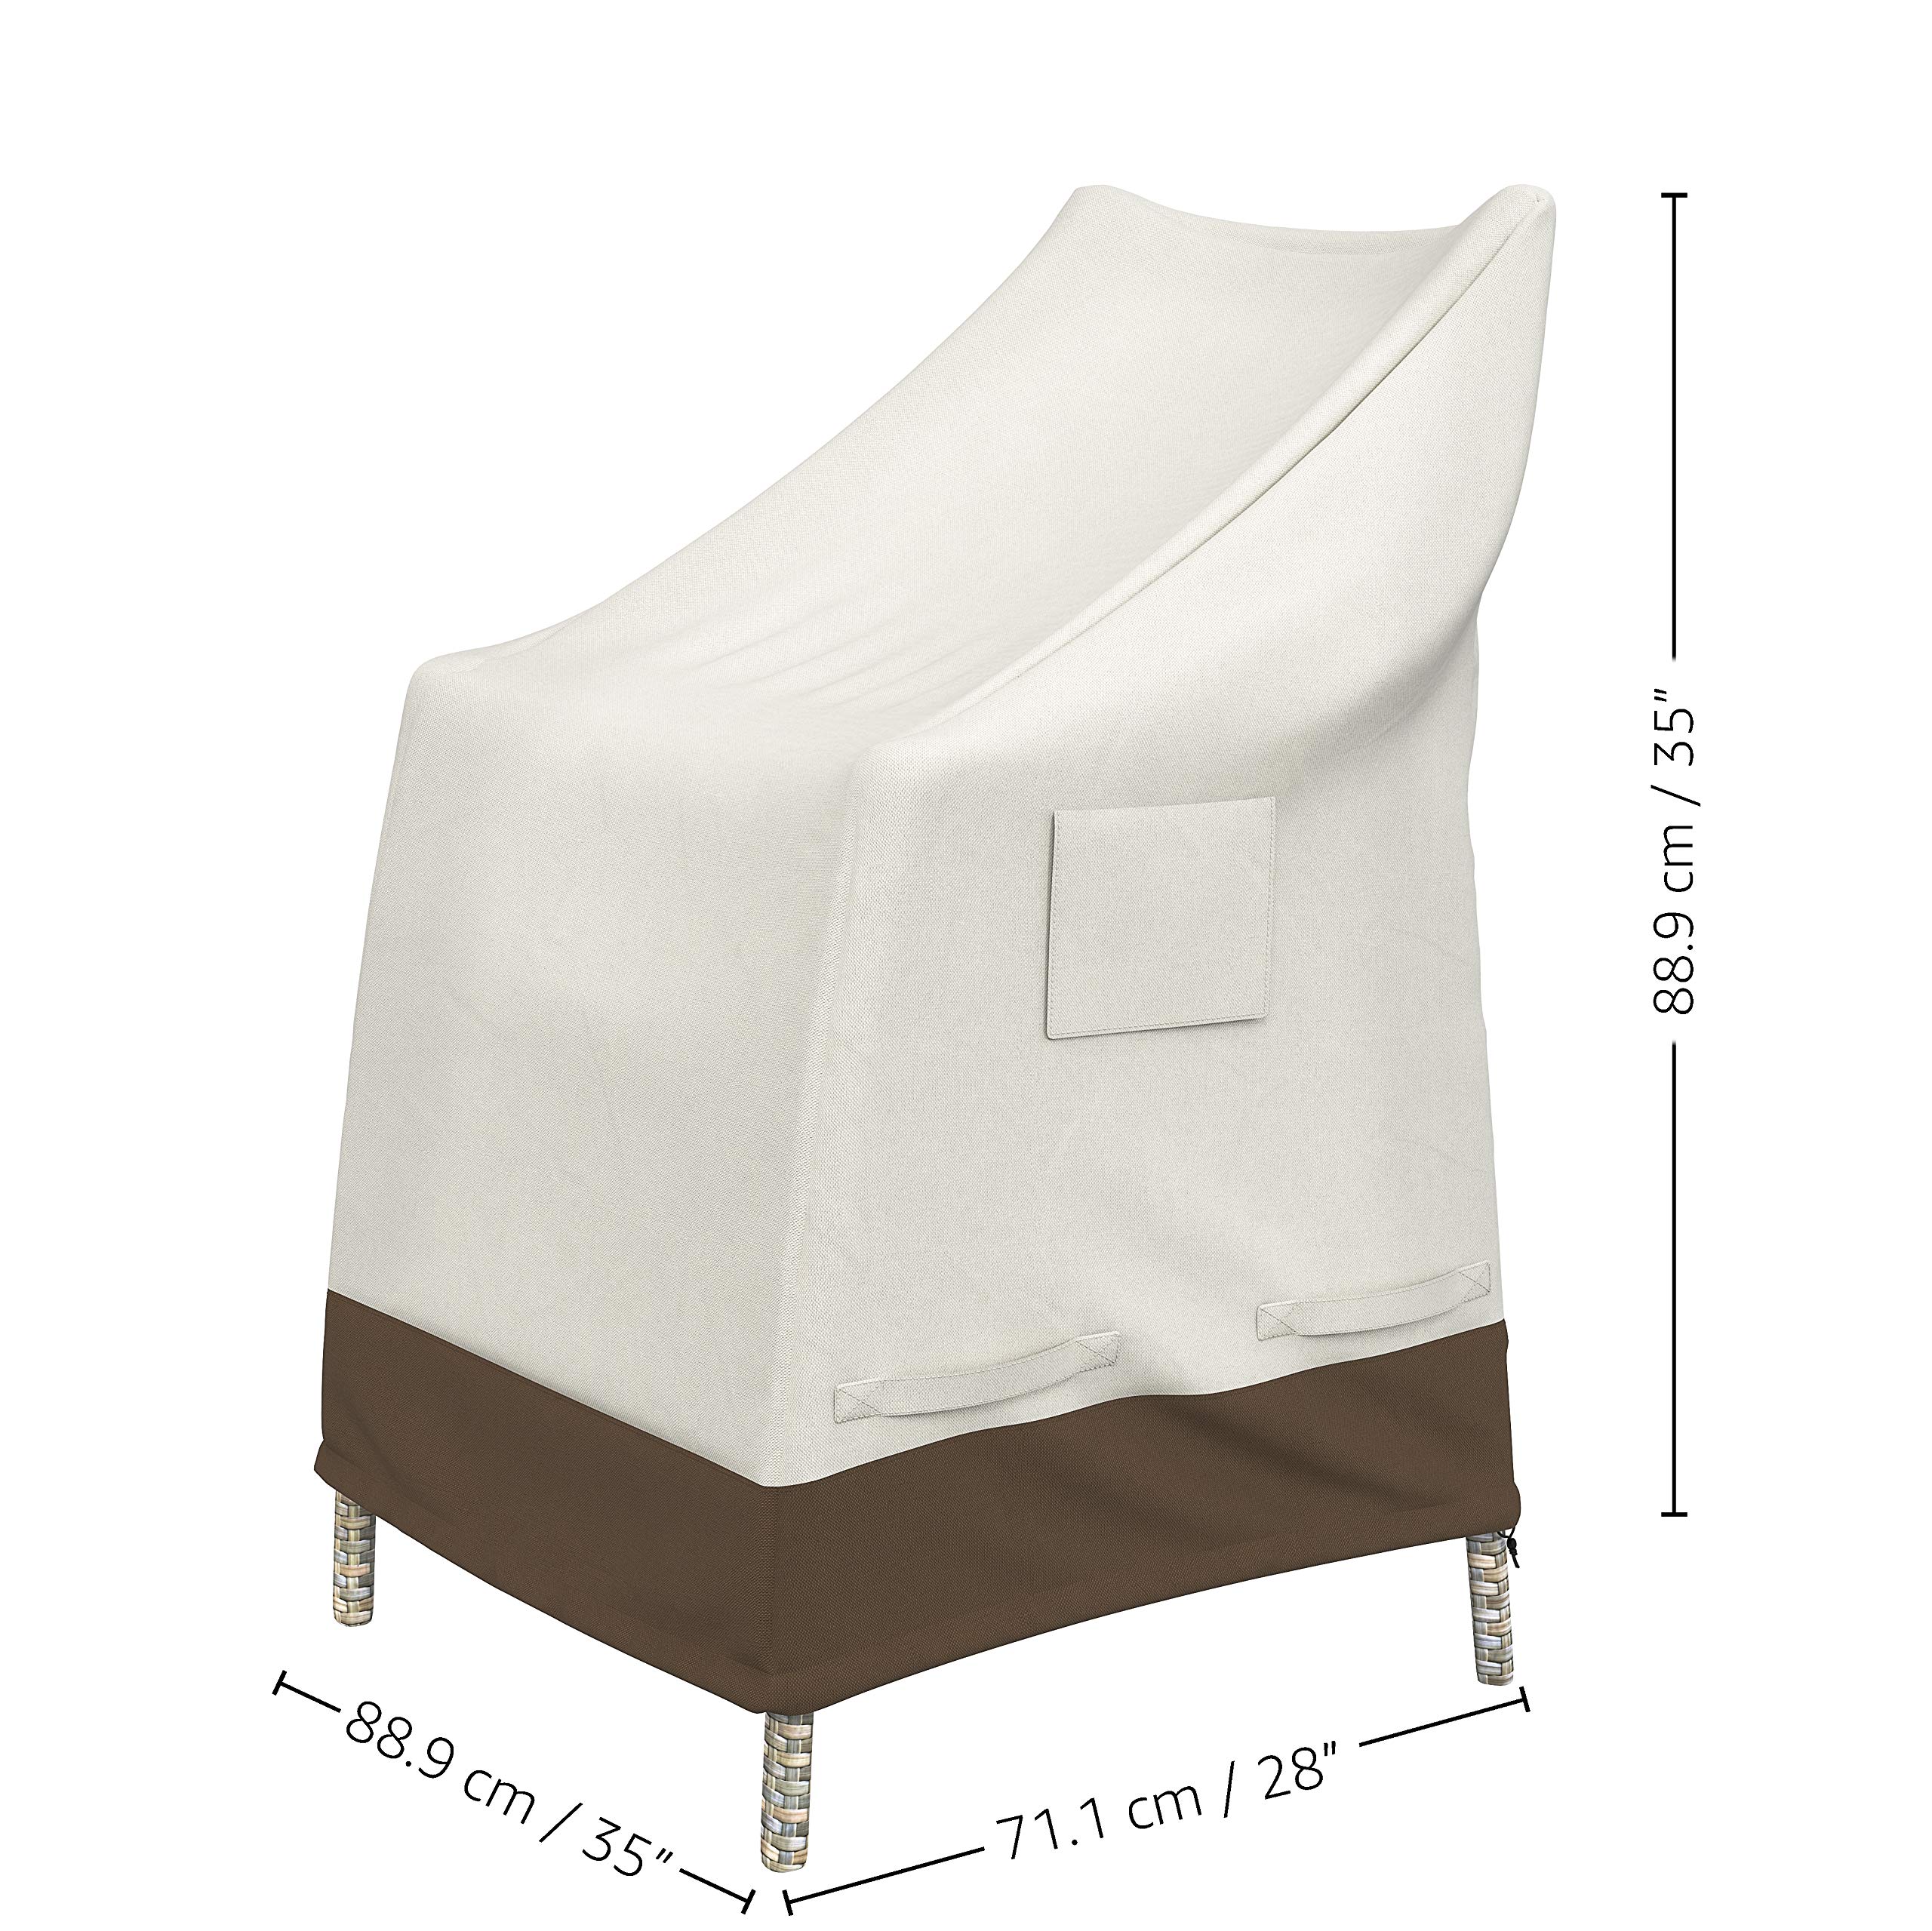 Amazon Basics High-Back Chair Outdoor Patio Furniture Cover, 35 x 28 x 35 inches, Beige / Tan